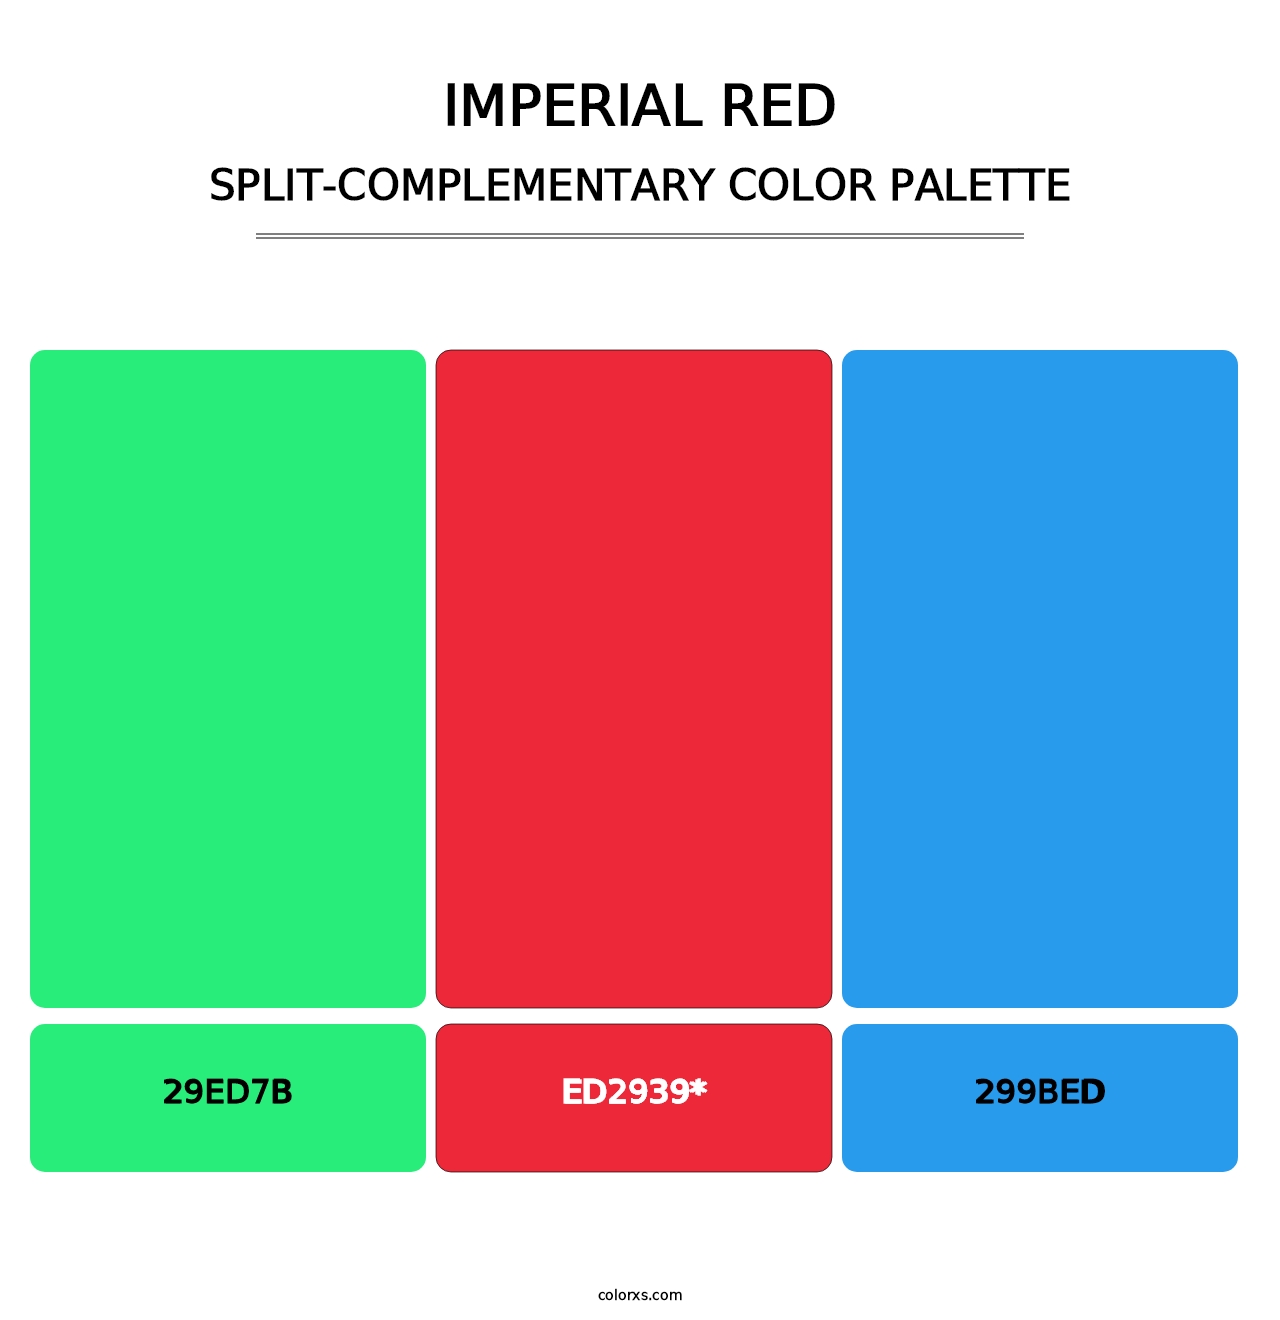 Imperial Red - Split-Complementary Color Palette